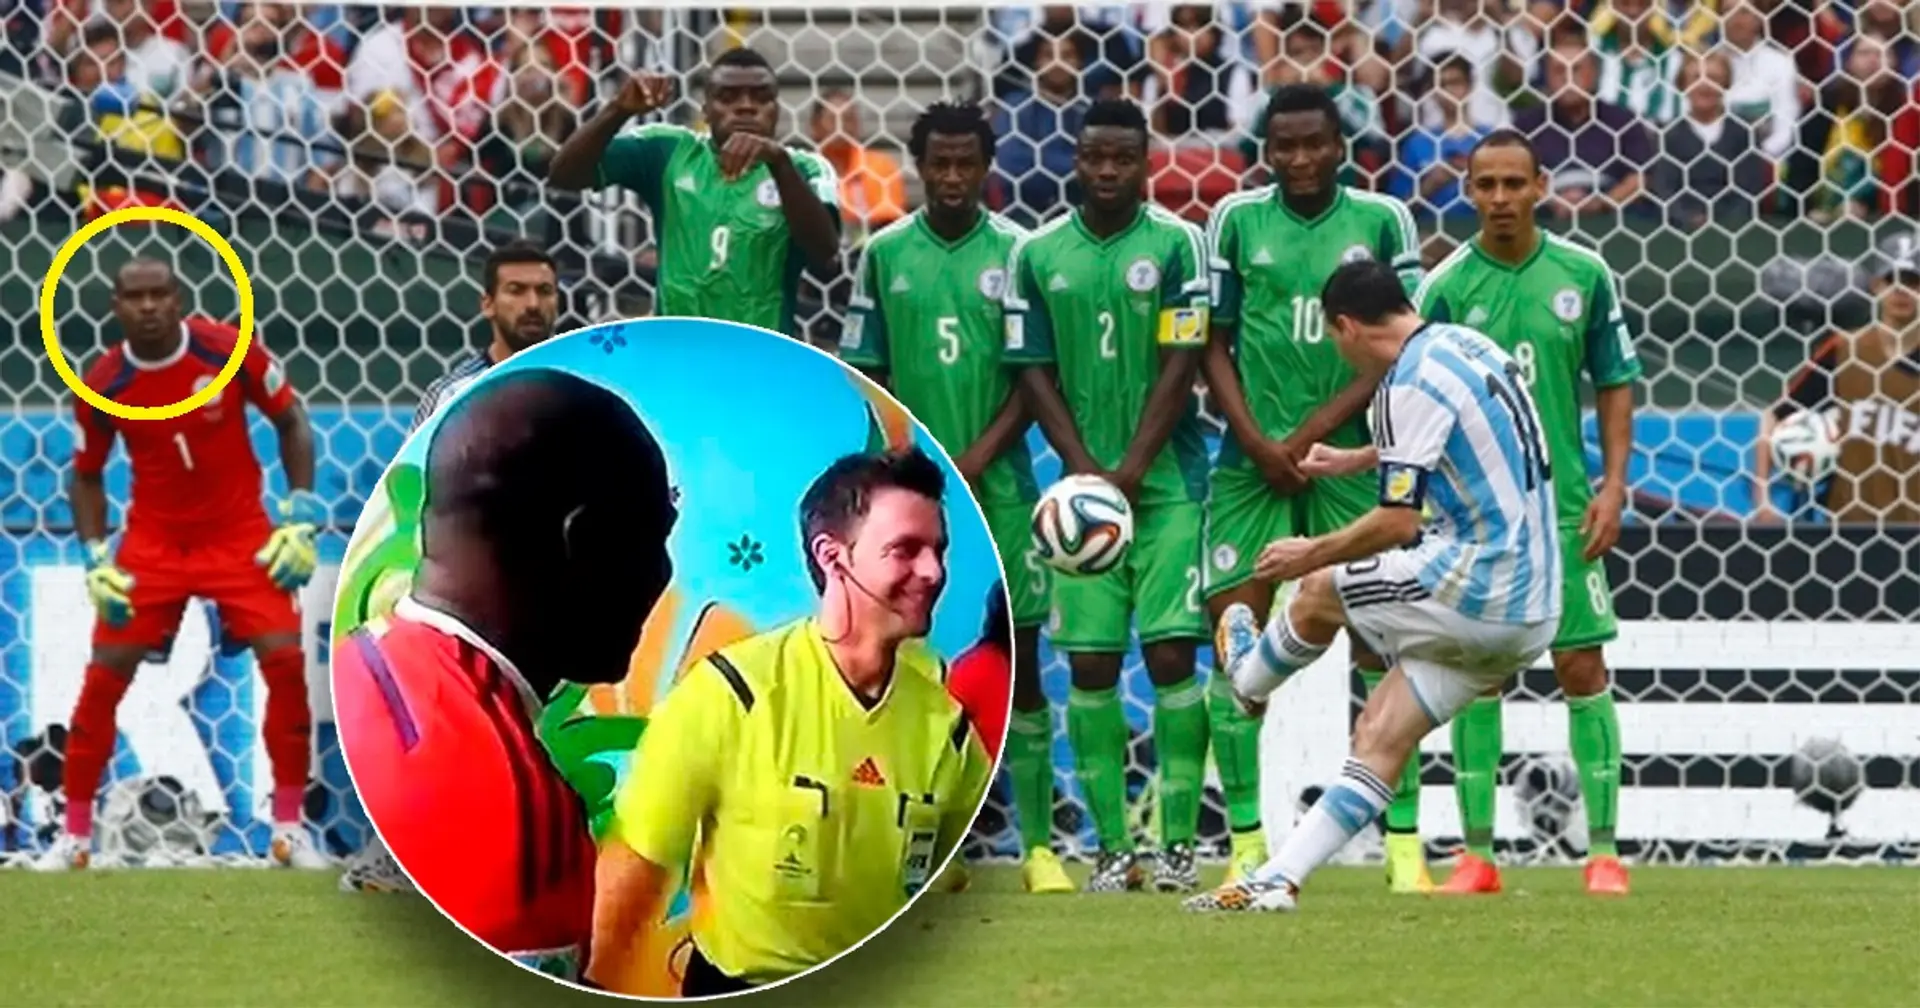 'Messi's so good, and I'm s**t': Nigerian goalkeeper Enyeama asked the referee not to give Leo free kicks during a World Cup match